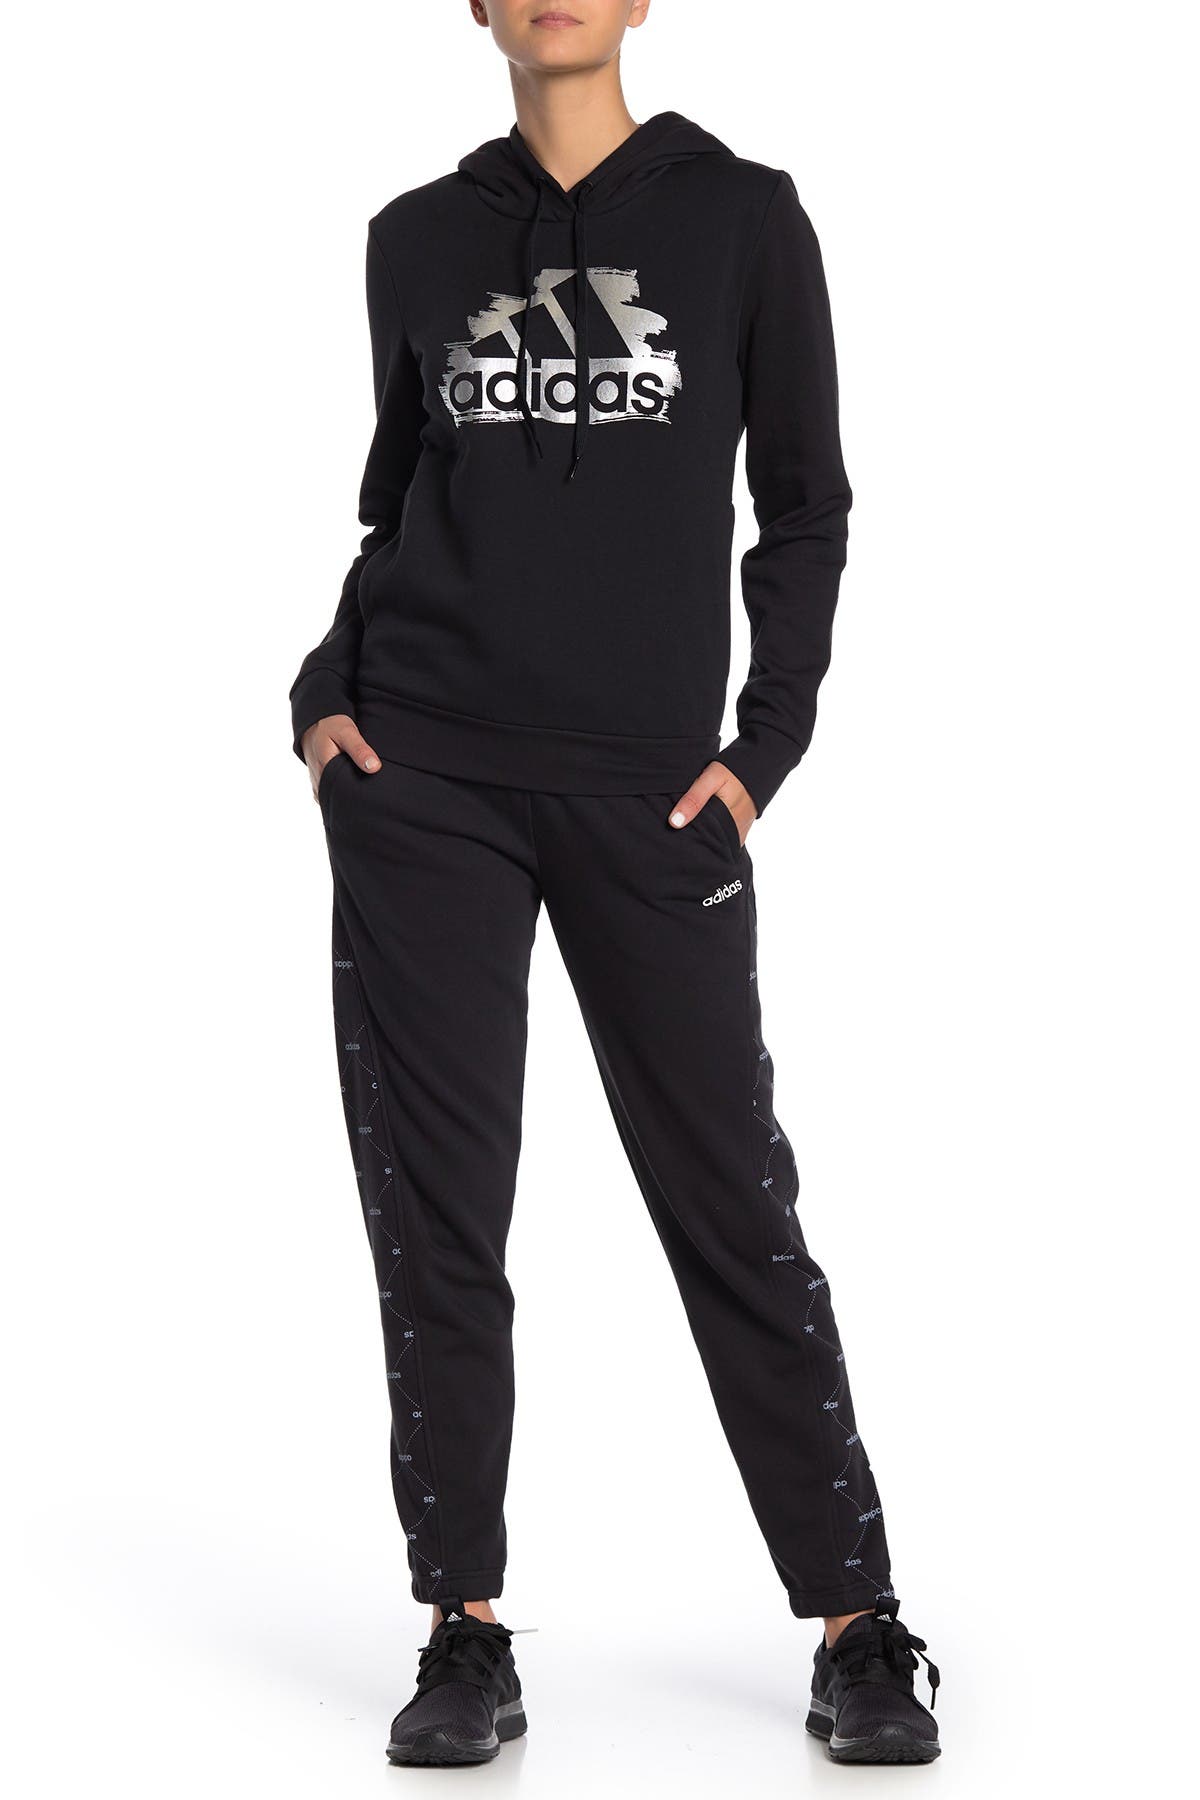 adidas terry tapered track pant